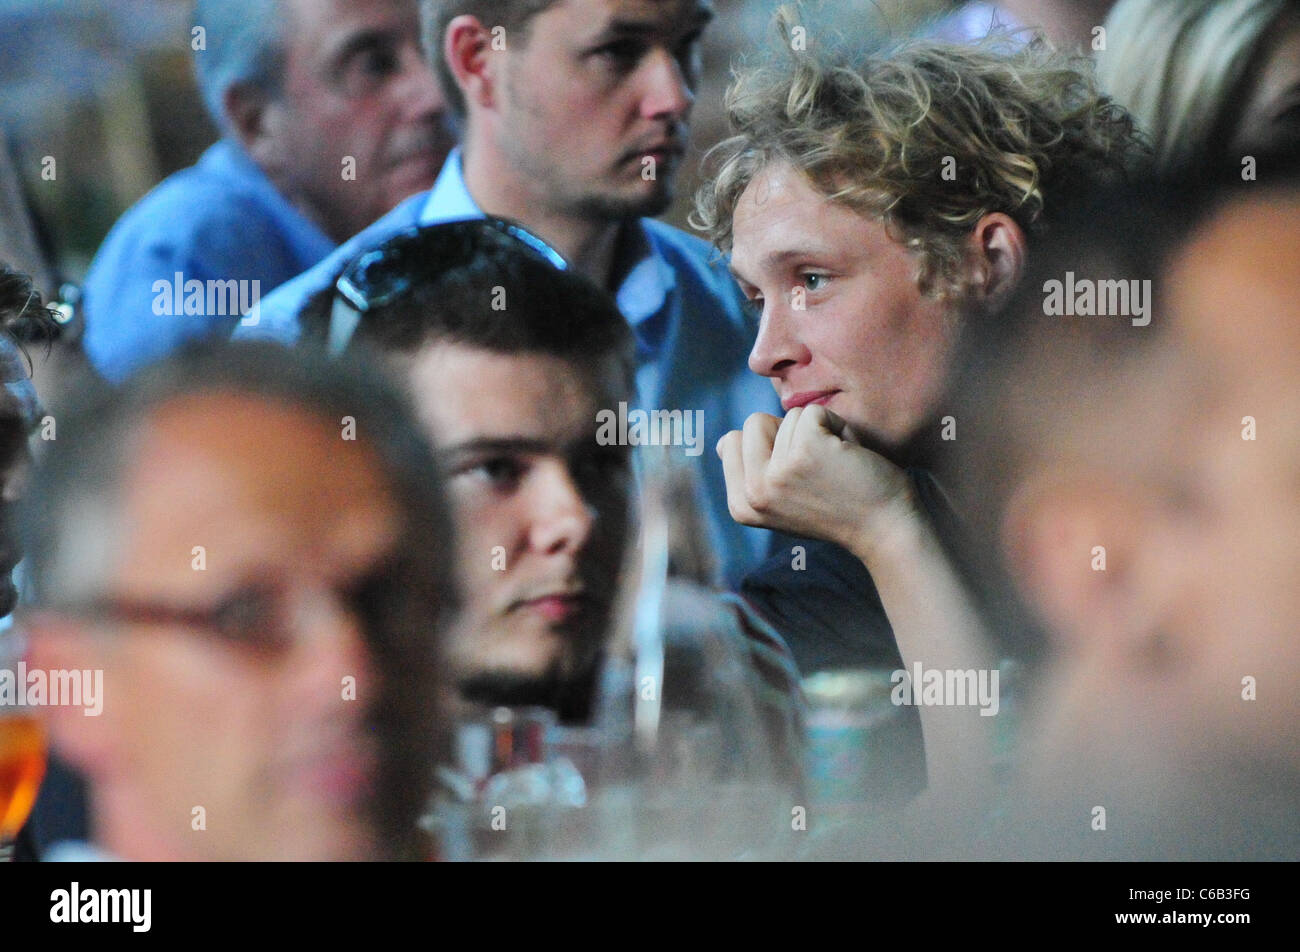 German actor Matthias Schweighoefer watching the World Cup 2010 semi finale between Germany and Spain at Cafe am neuen See Stock Photo